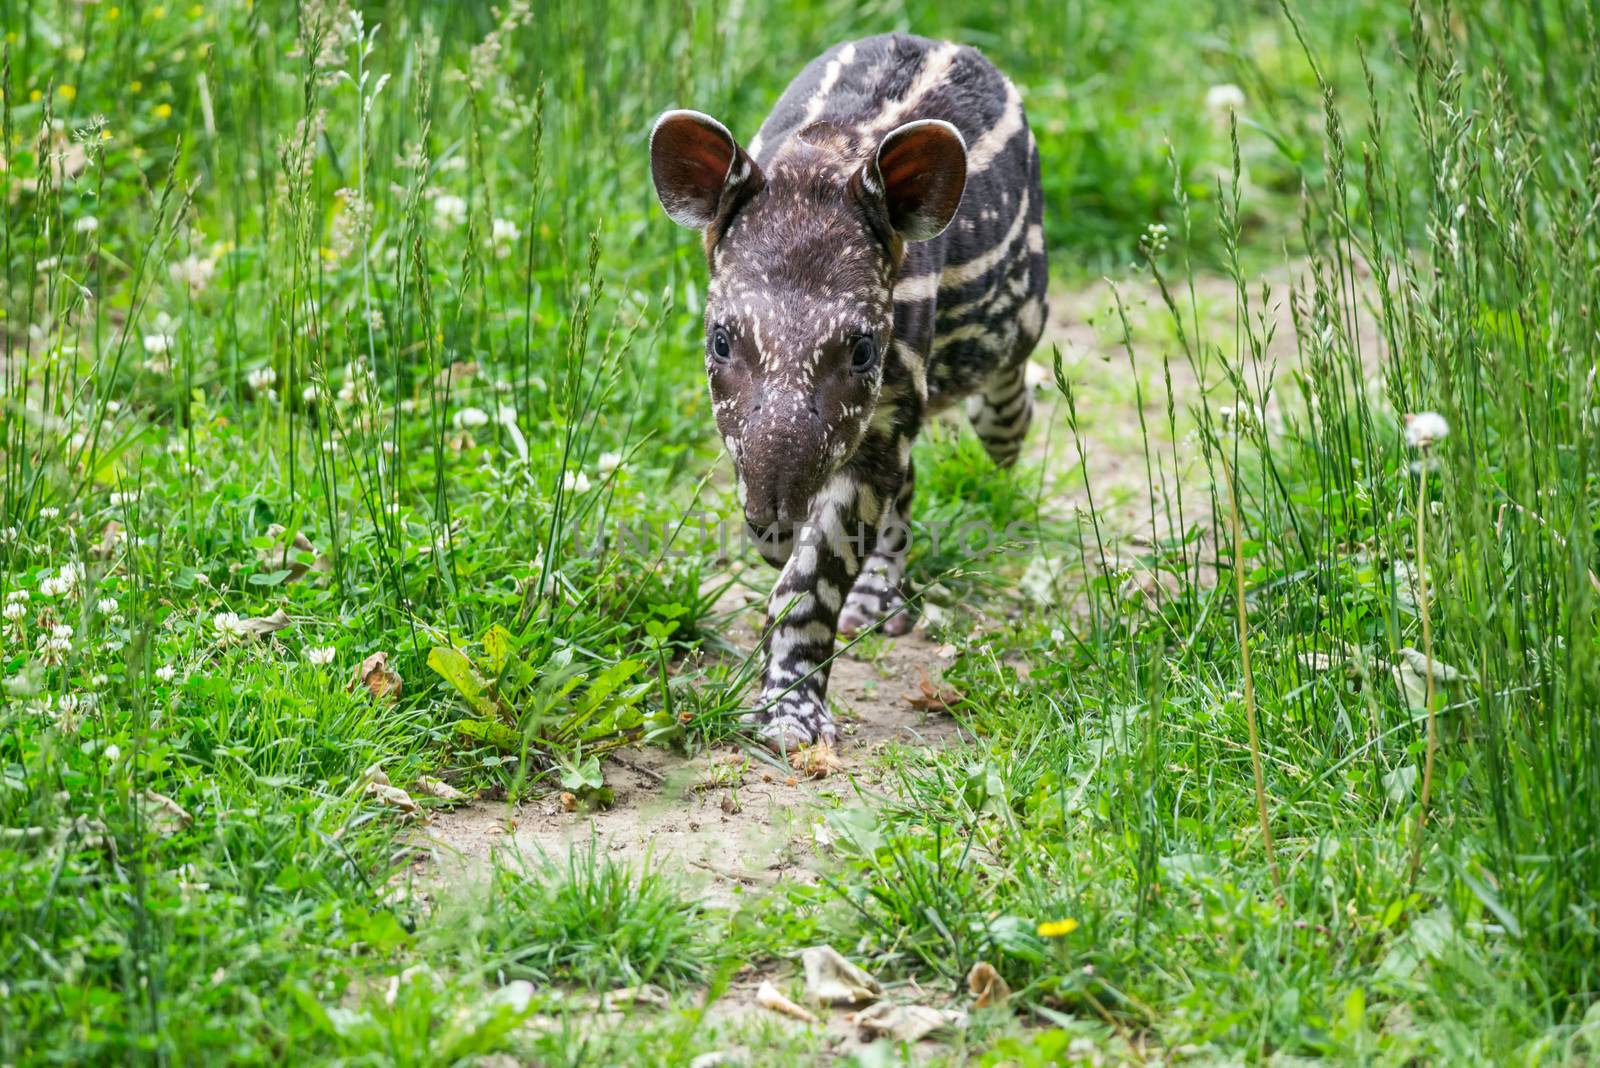 Baby of the endangered South American tapir by nickfox